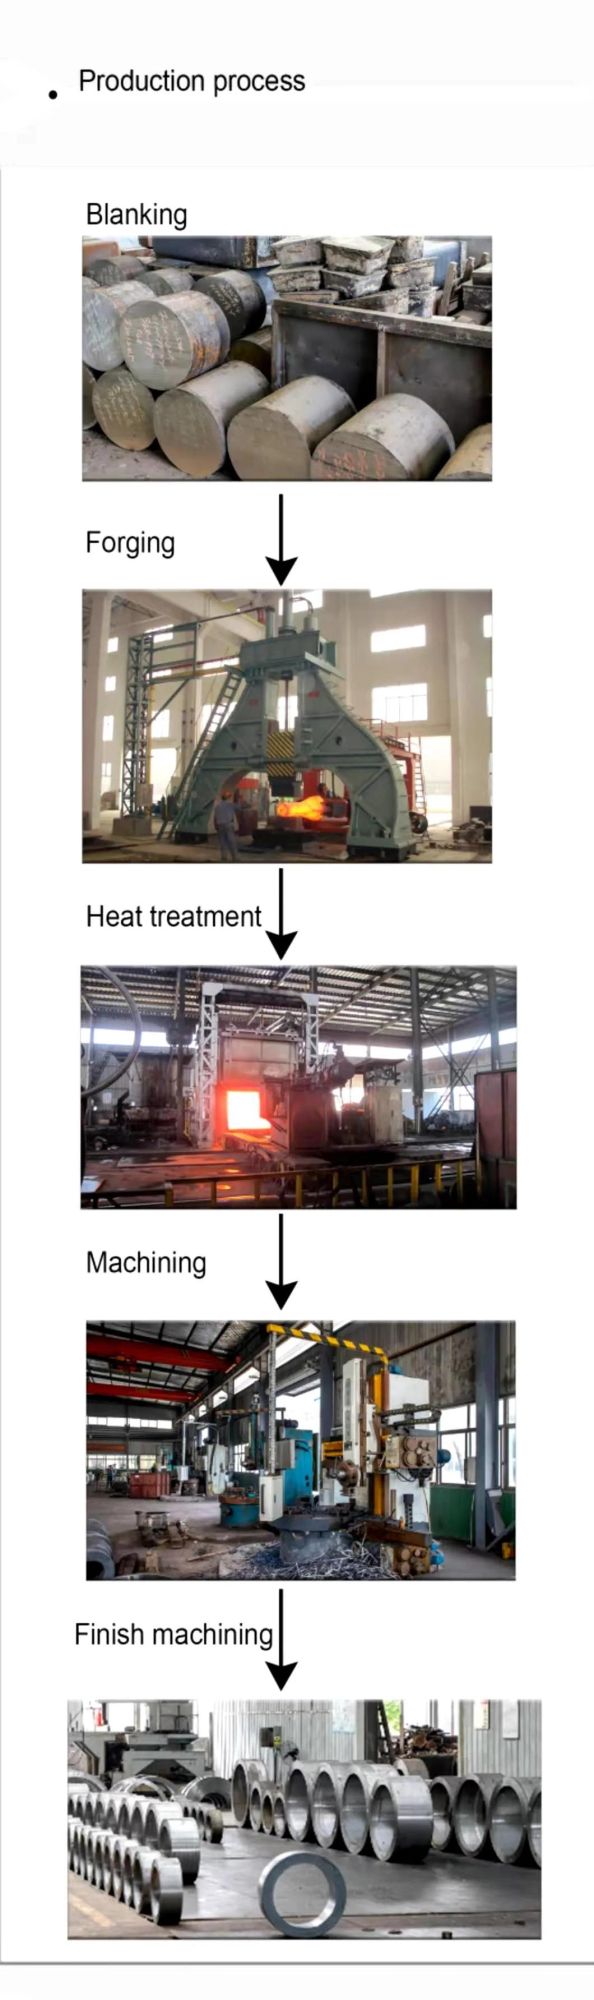 Professional Hot Forging Parts in Automobile and Agricultural Machinery